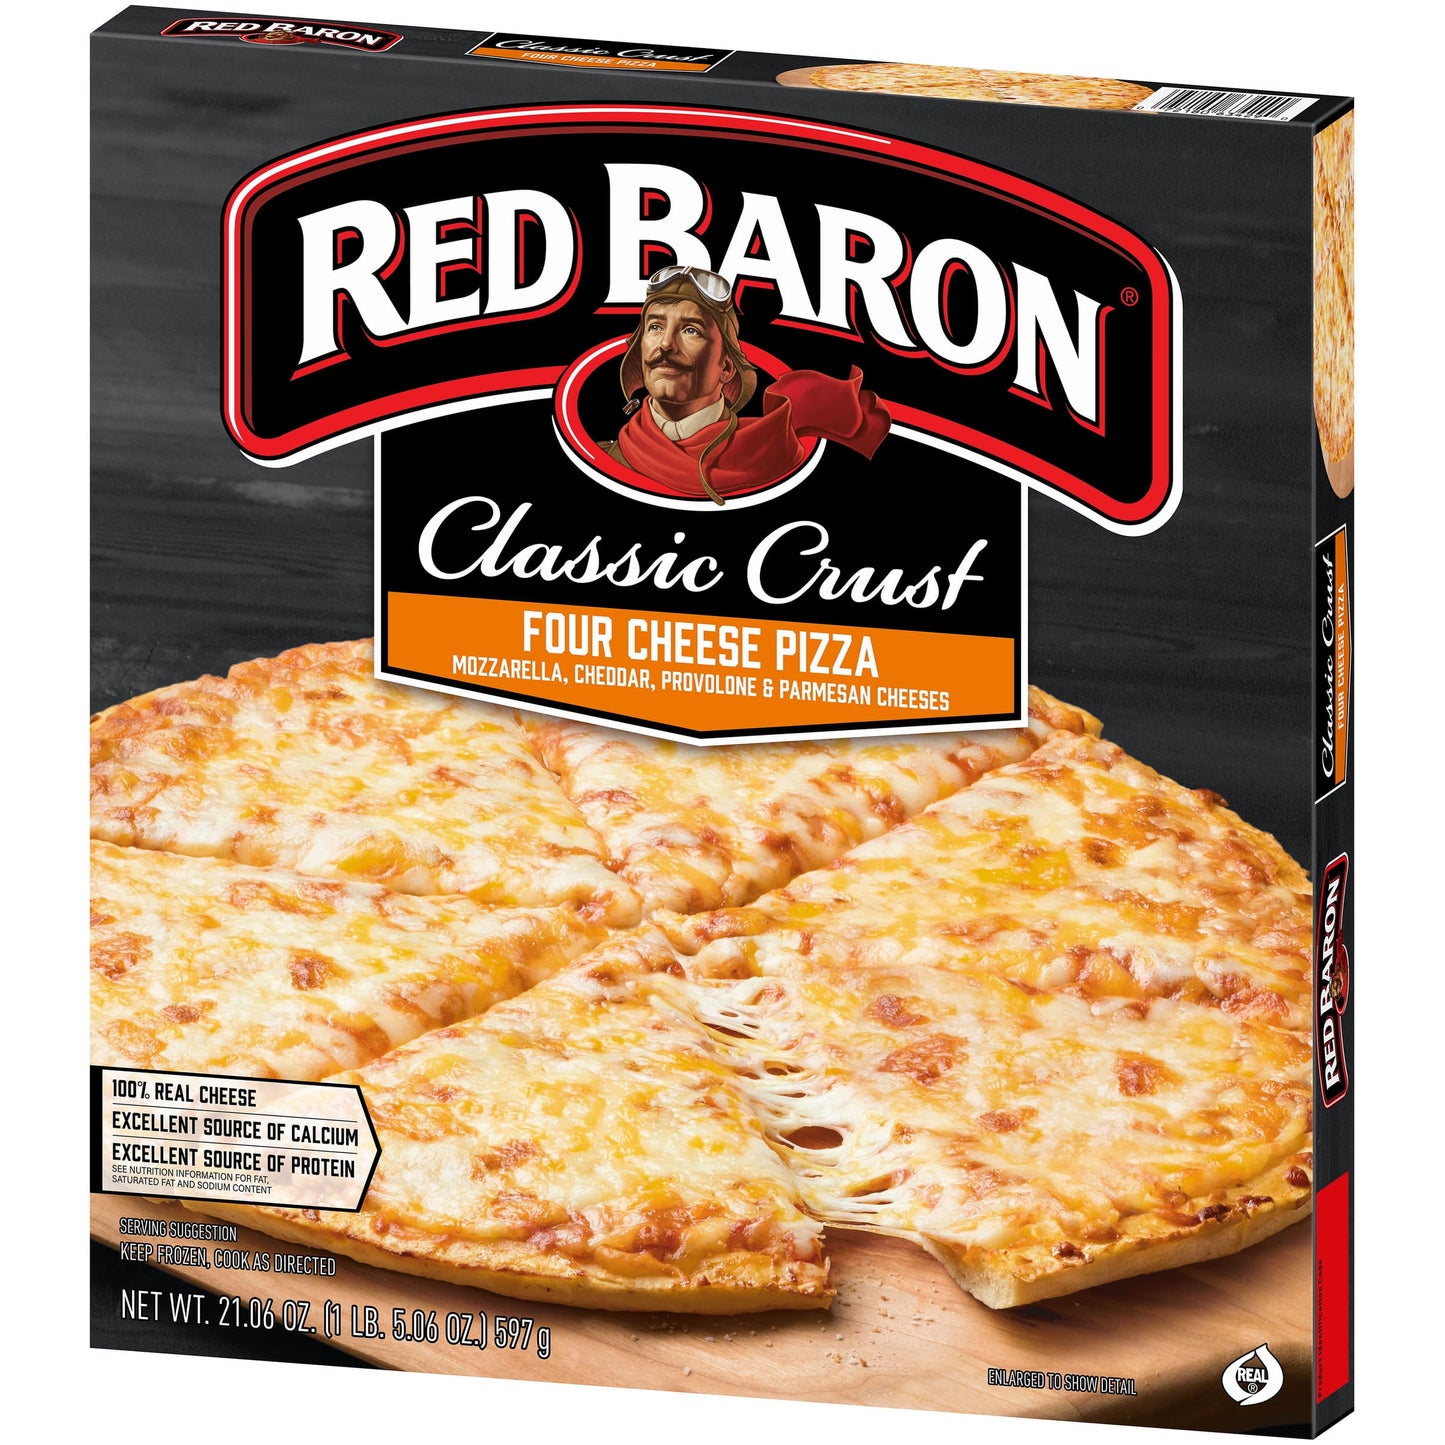 Red Baron, Frozen Pizza Classic Crust 4-Cheese, 21.06 oz